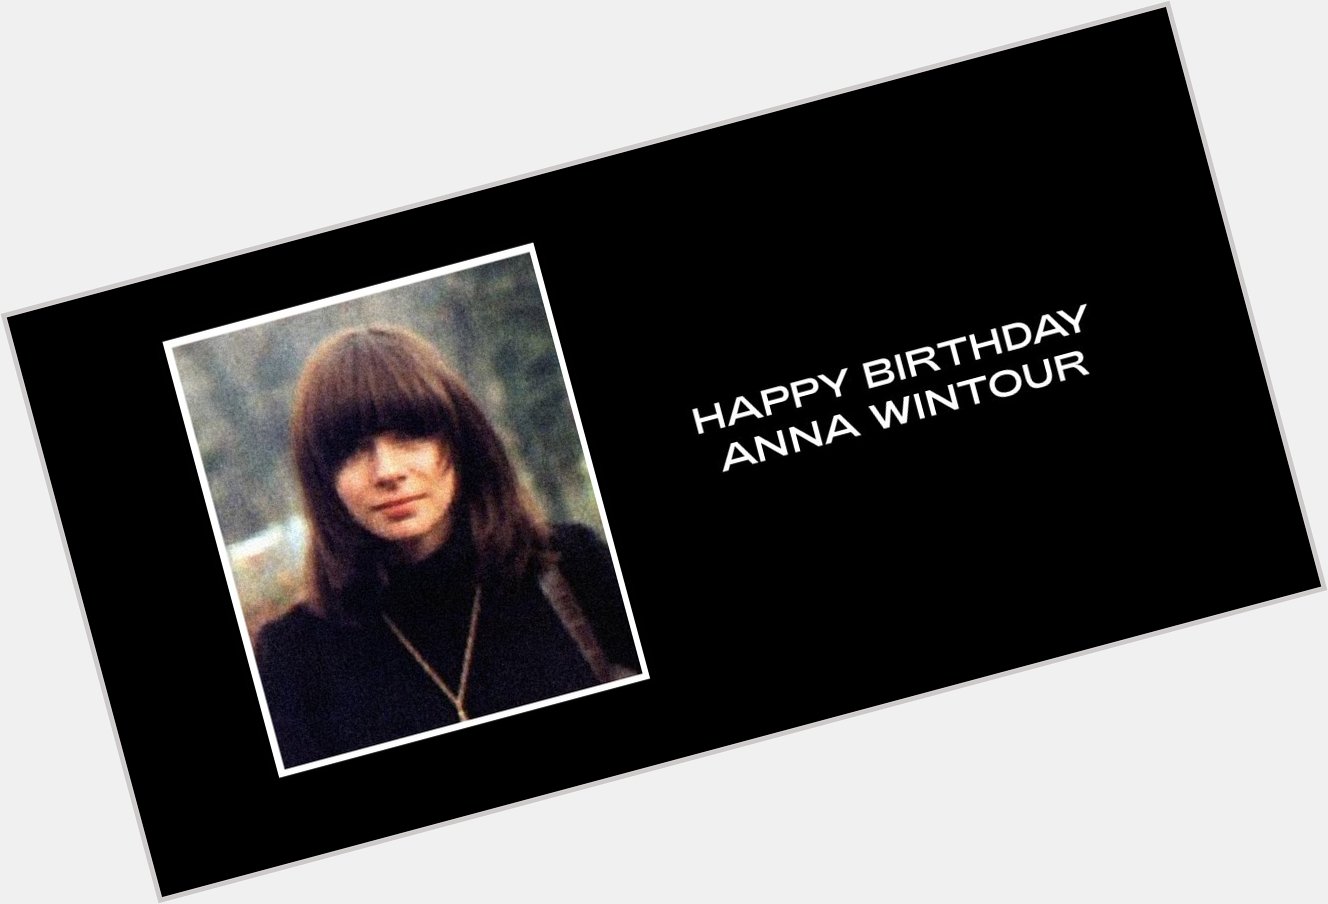 Beyoncé wishes Anna Wintour a happy 72nd birthday. 